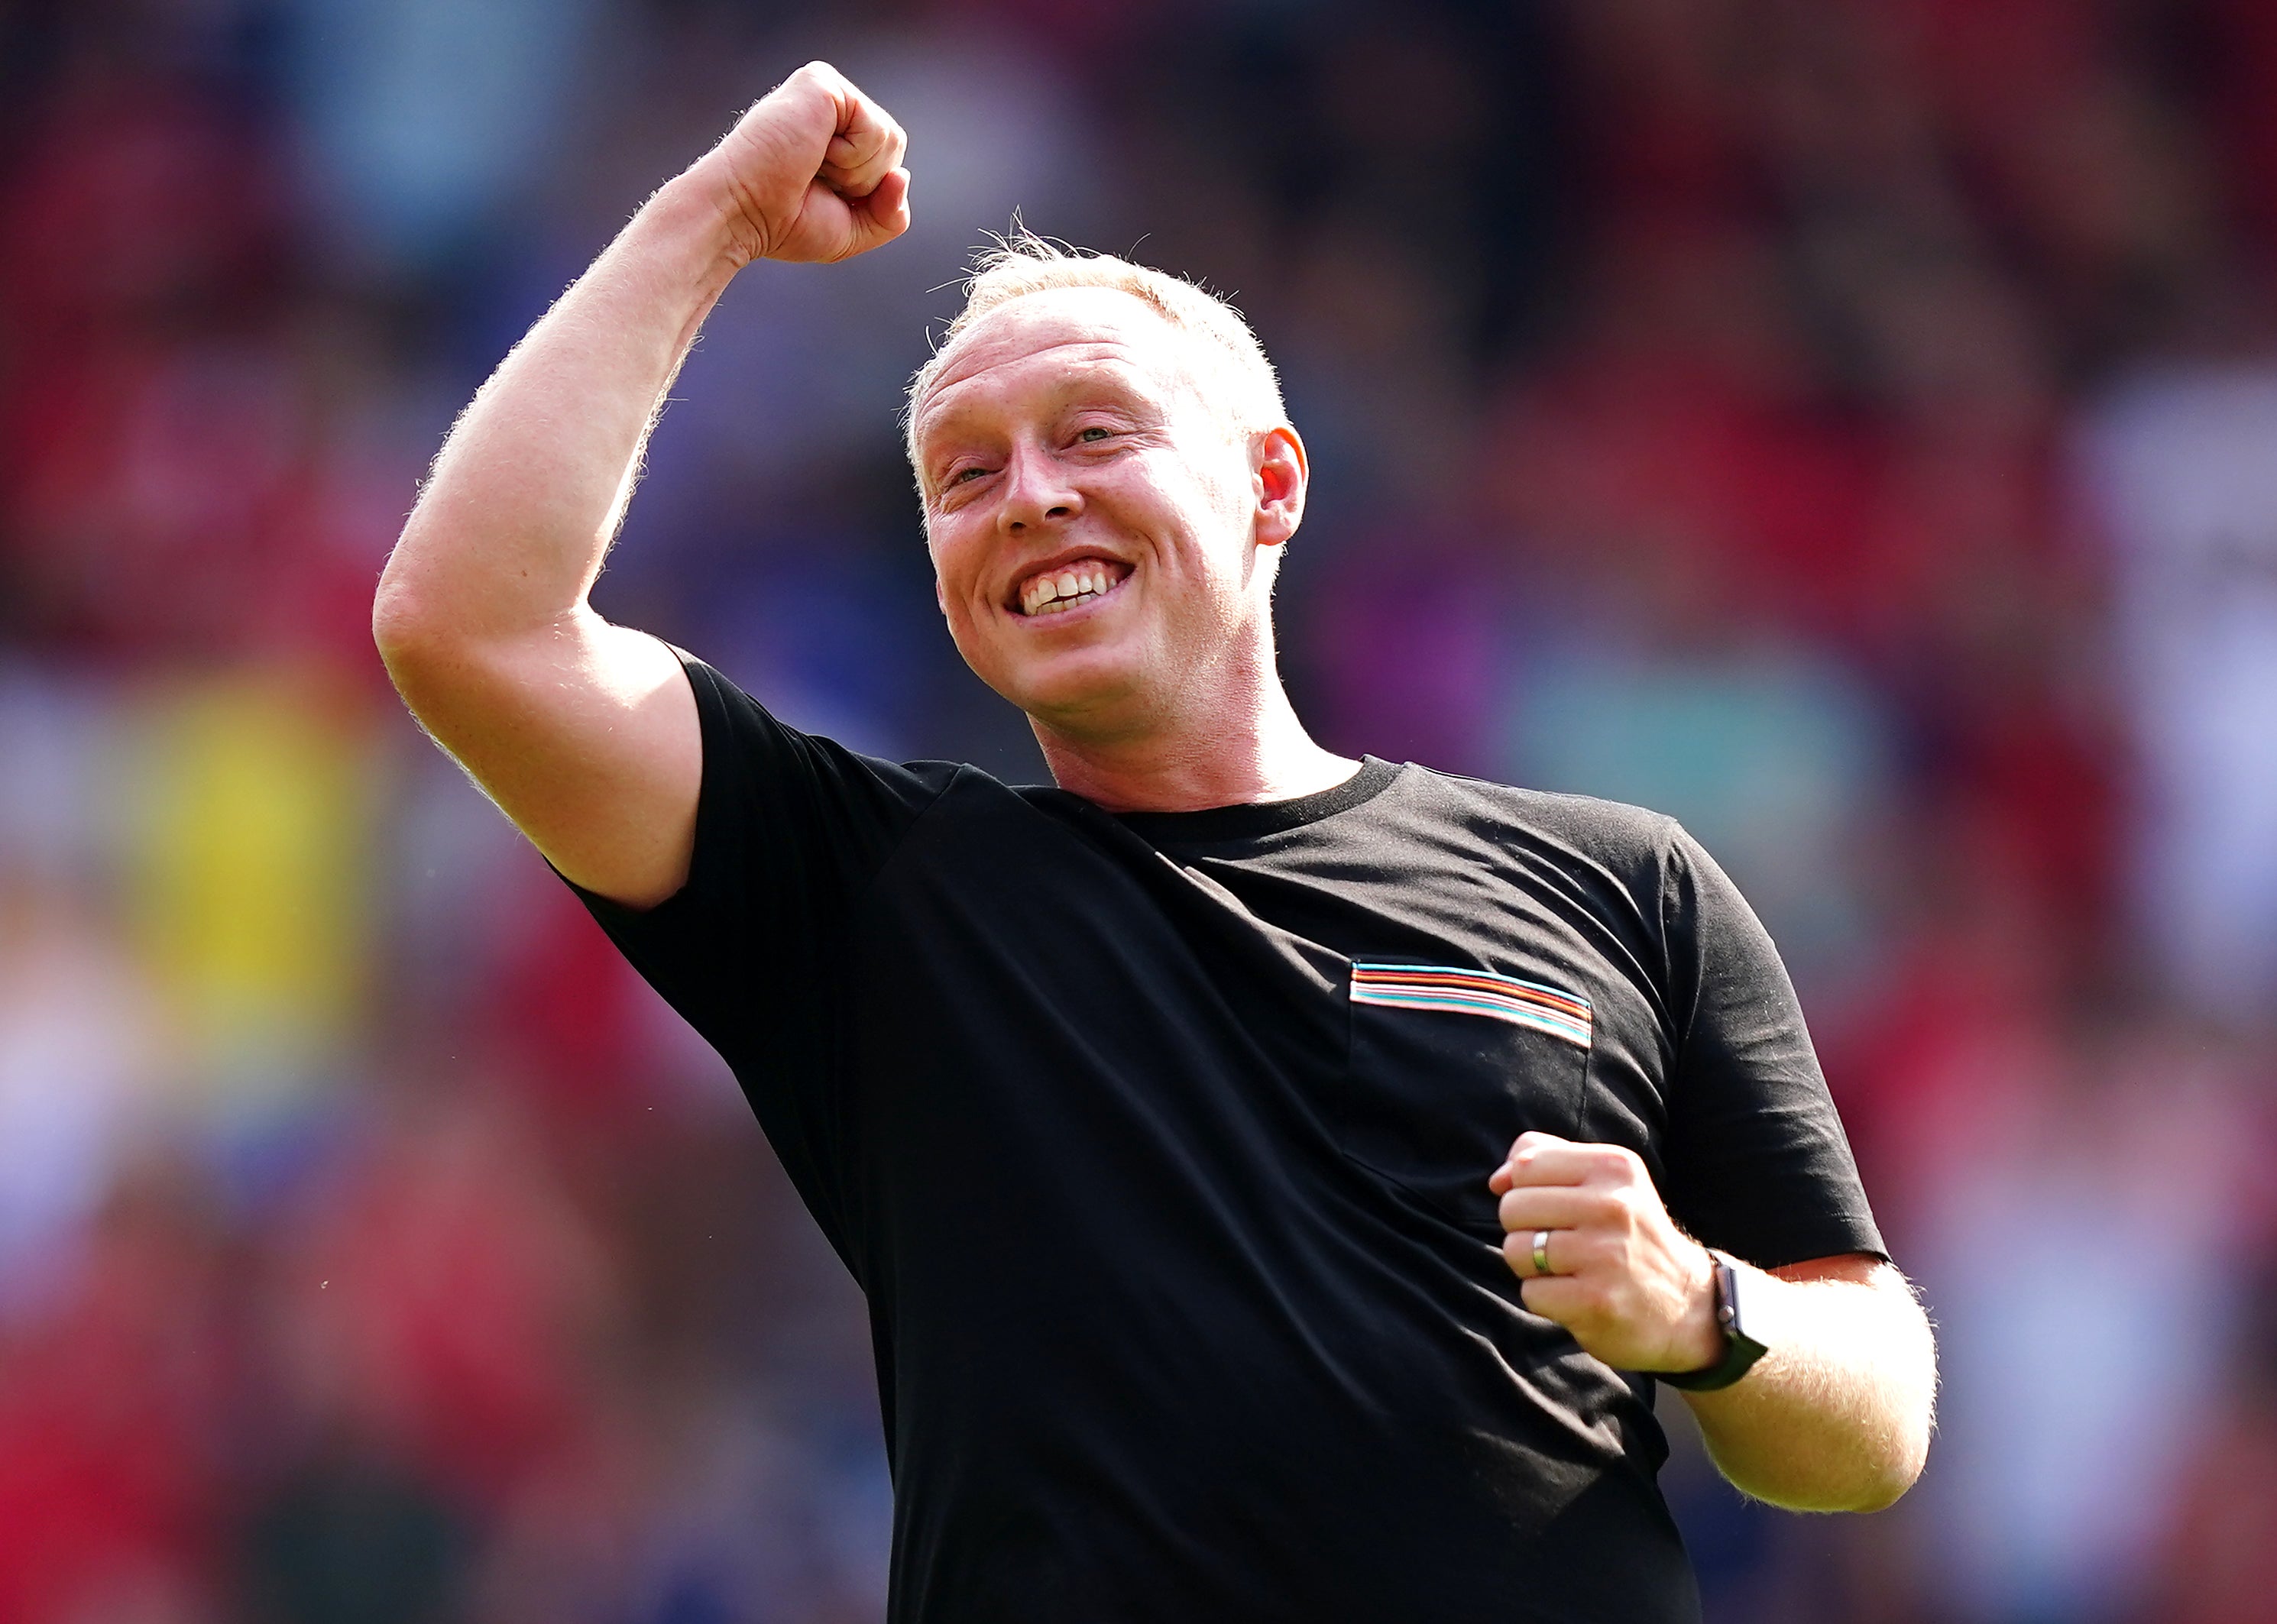 Steve Cooper has seen his Forest squad boosted by a summer spending spree following promotion (Mike Egerton/PA Wire)